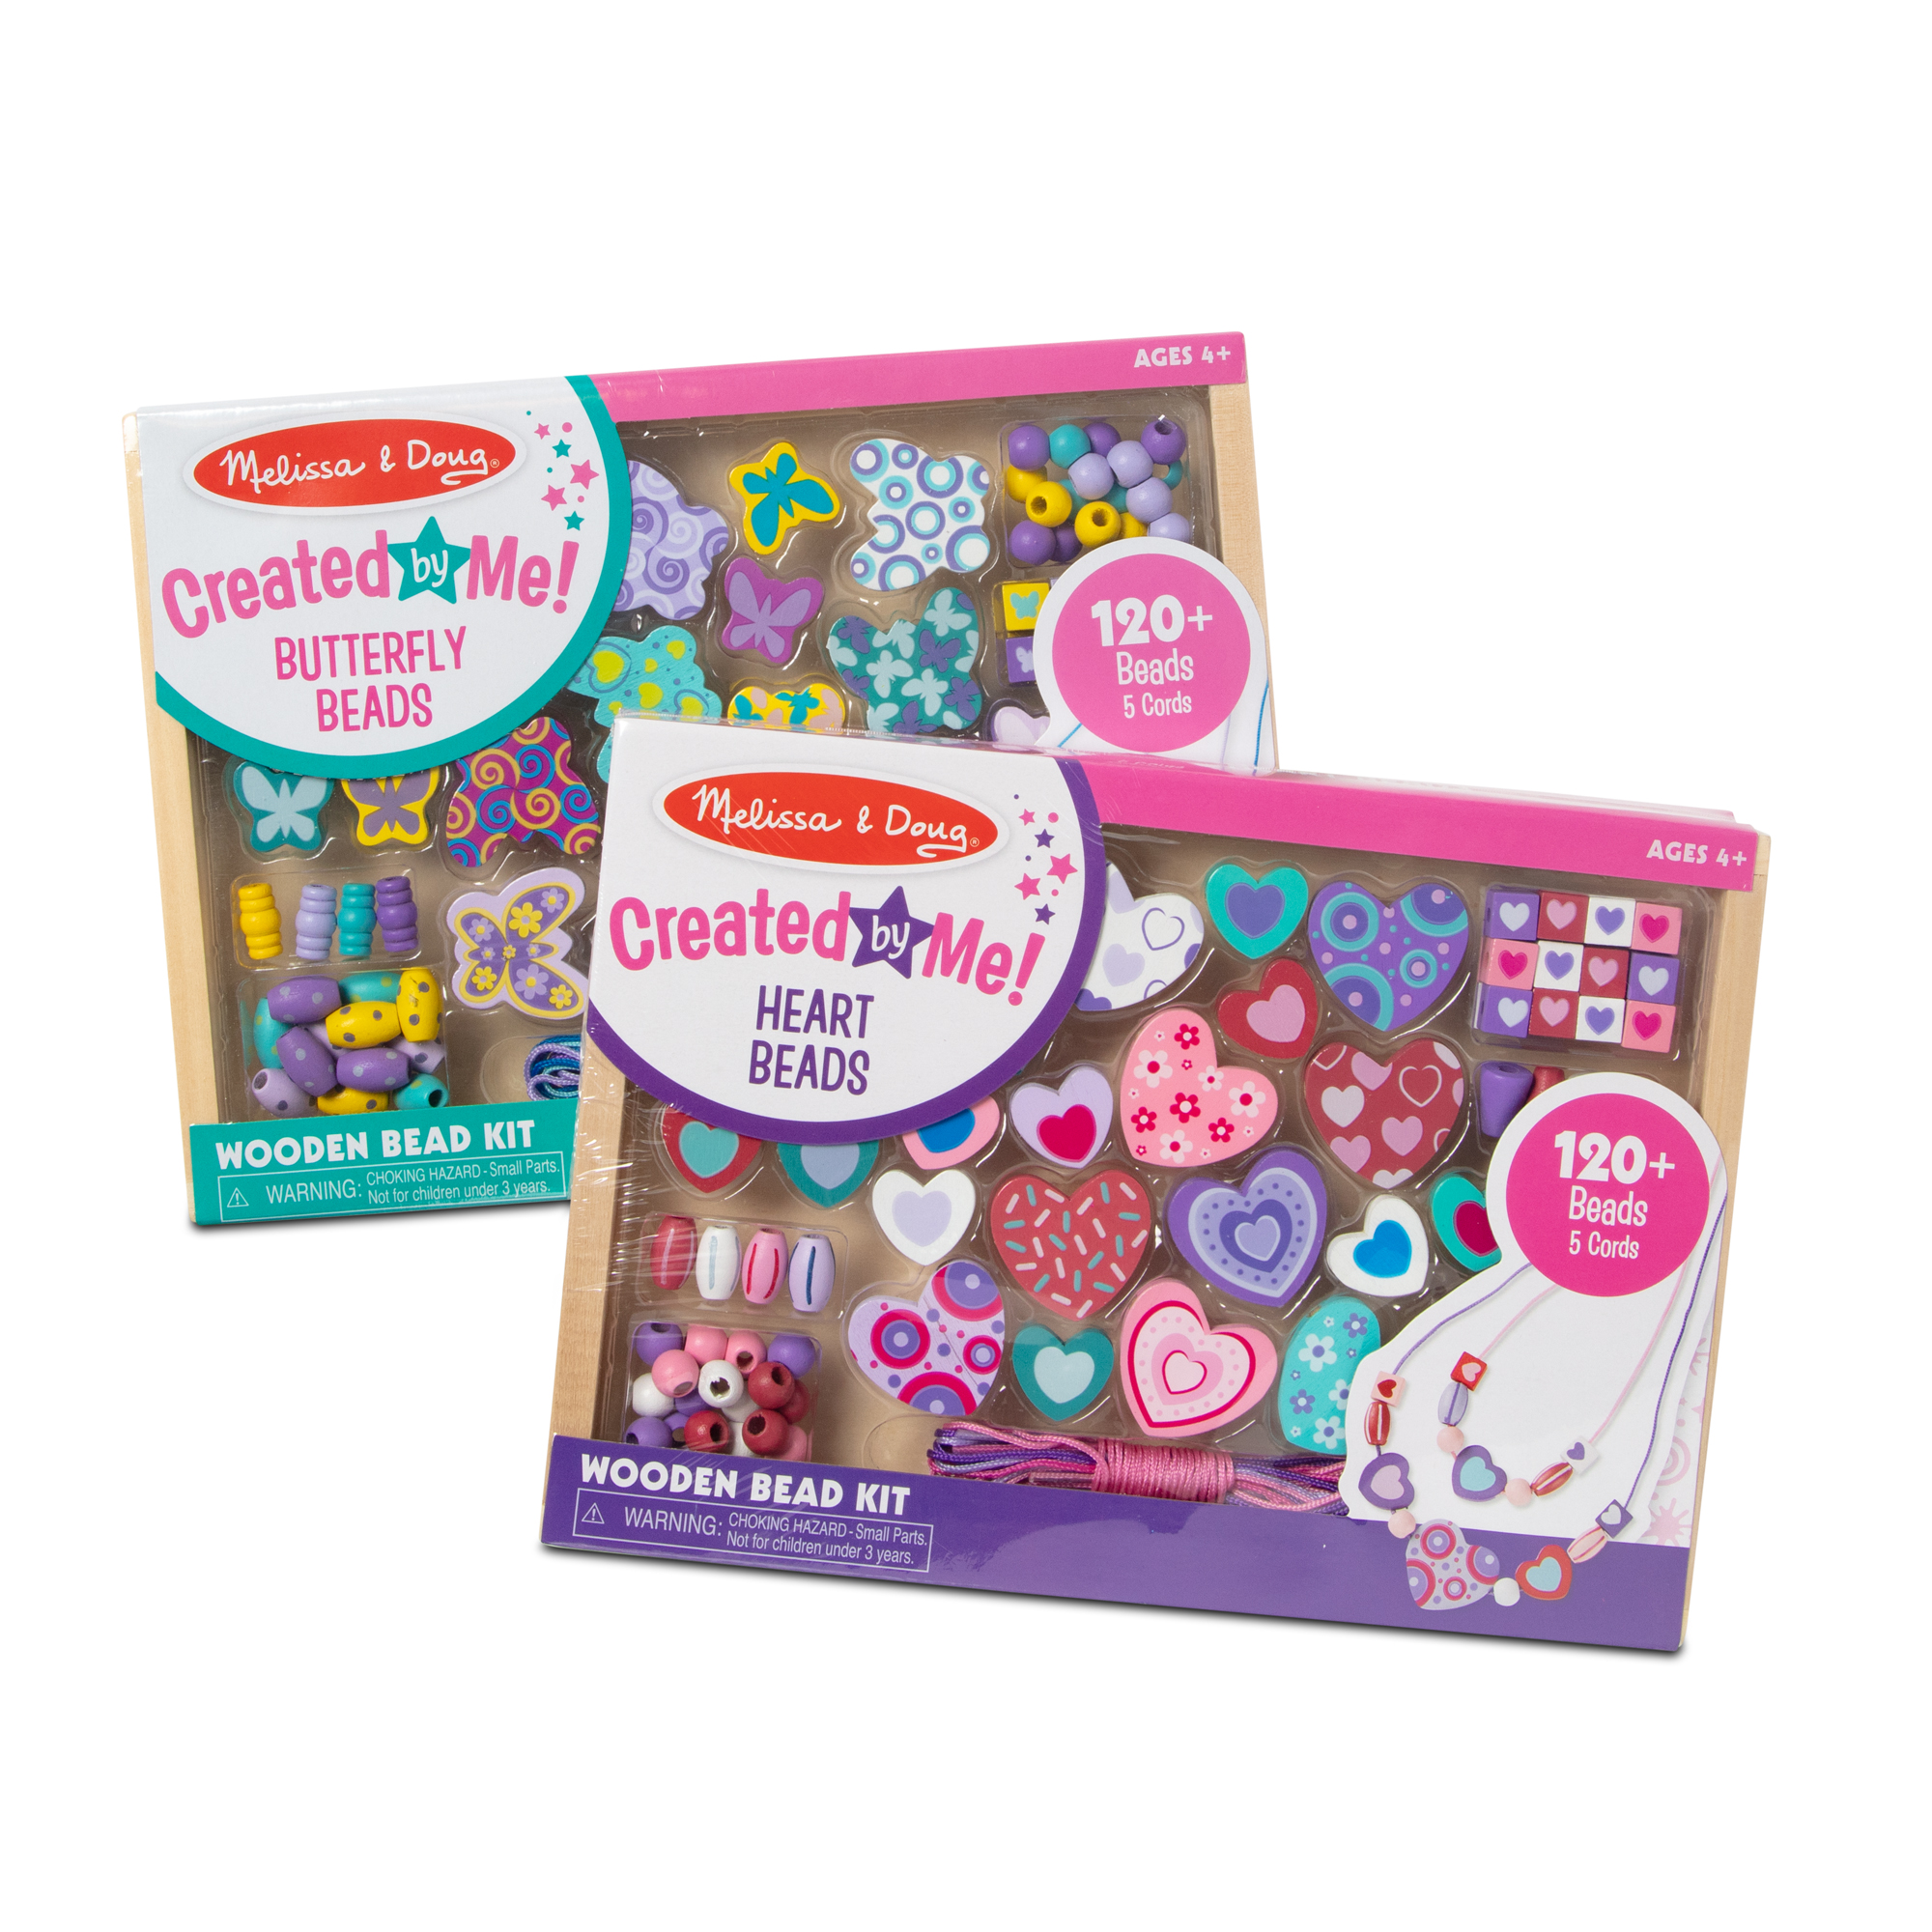 Melissa & Doug Sweet Hearts and Butterfly Friends Bead Set of 2 - 250+ Wooden Beads - image 1 of 9